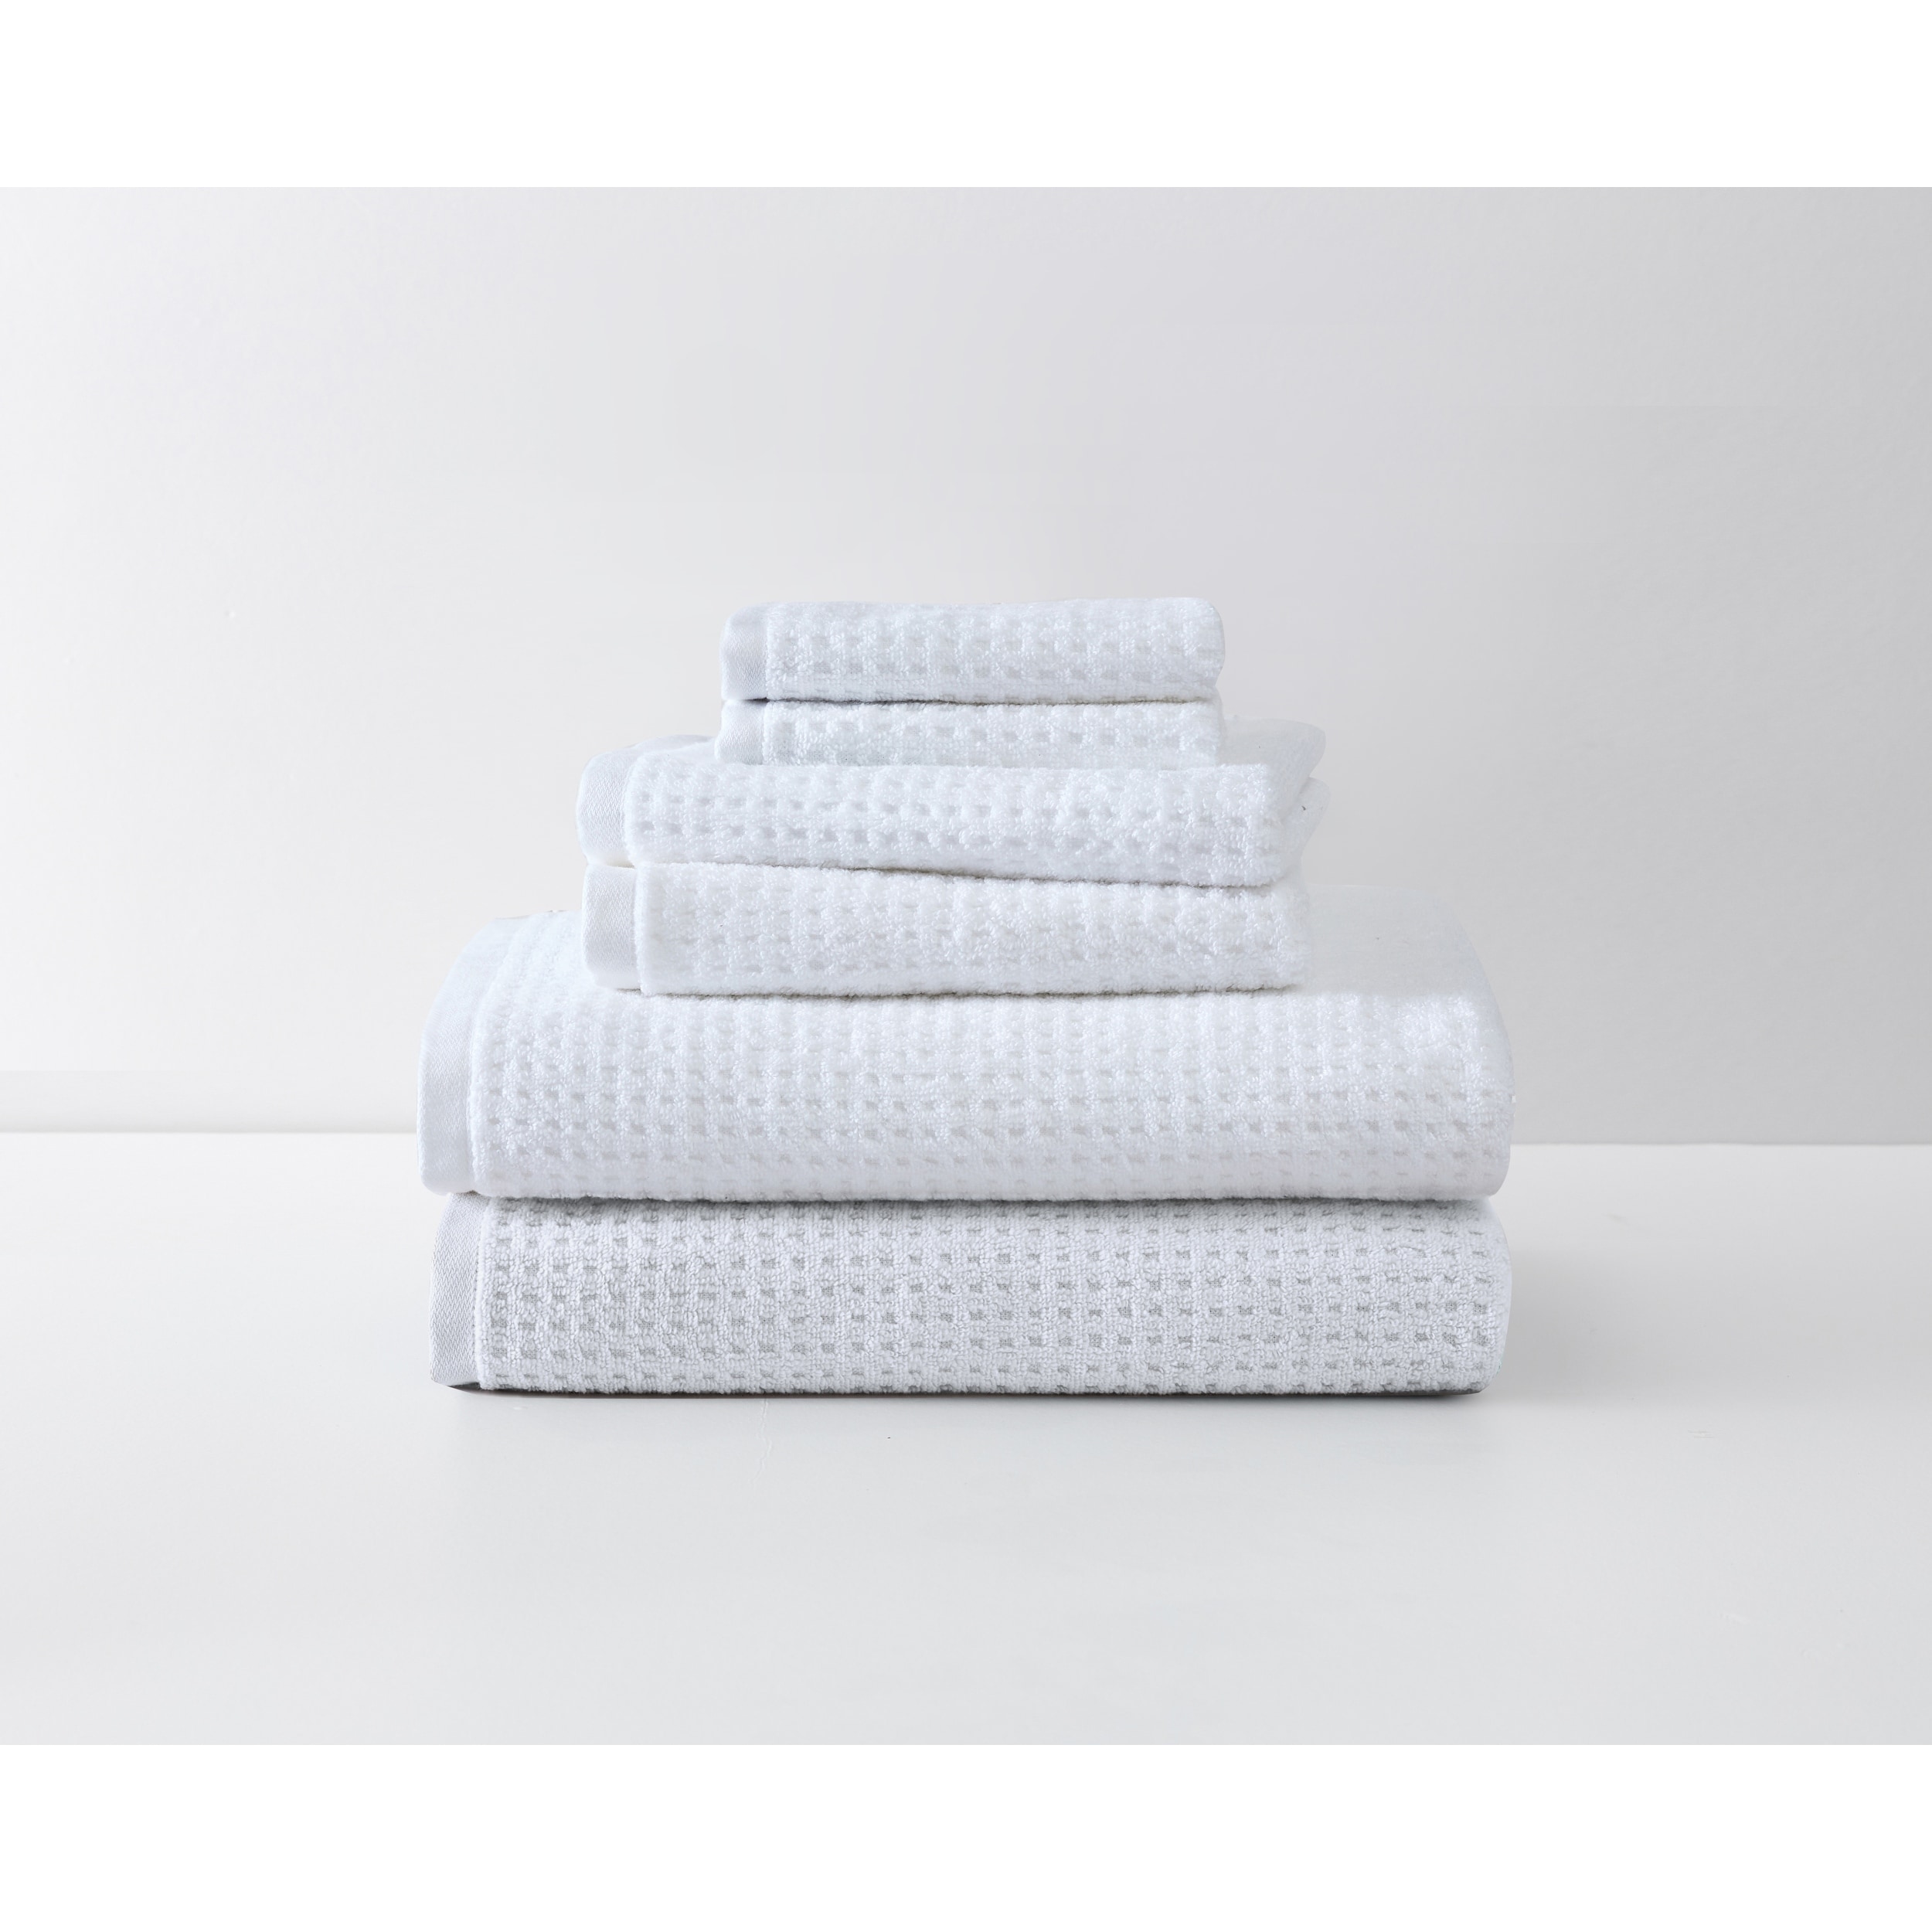 https://ak1.ostkcdn.com/images/products/is/images/direct/24dcacdb931f60e6fda68b1d1784bc5e01632a4b/Tommy-Bahama-Northern-Pacific-Cotton-6-Piece-Towel-Set.jpg